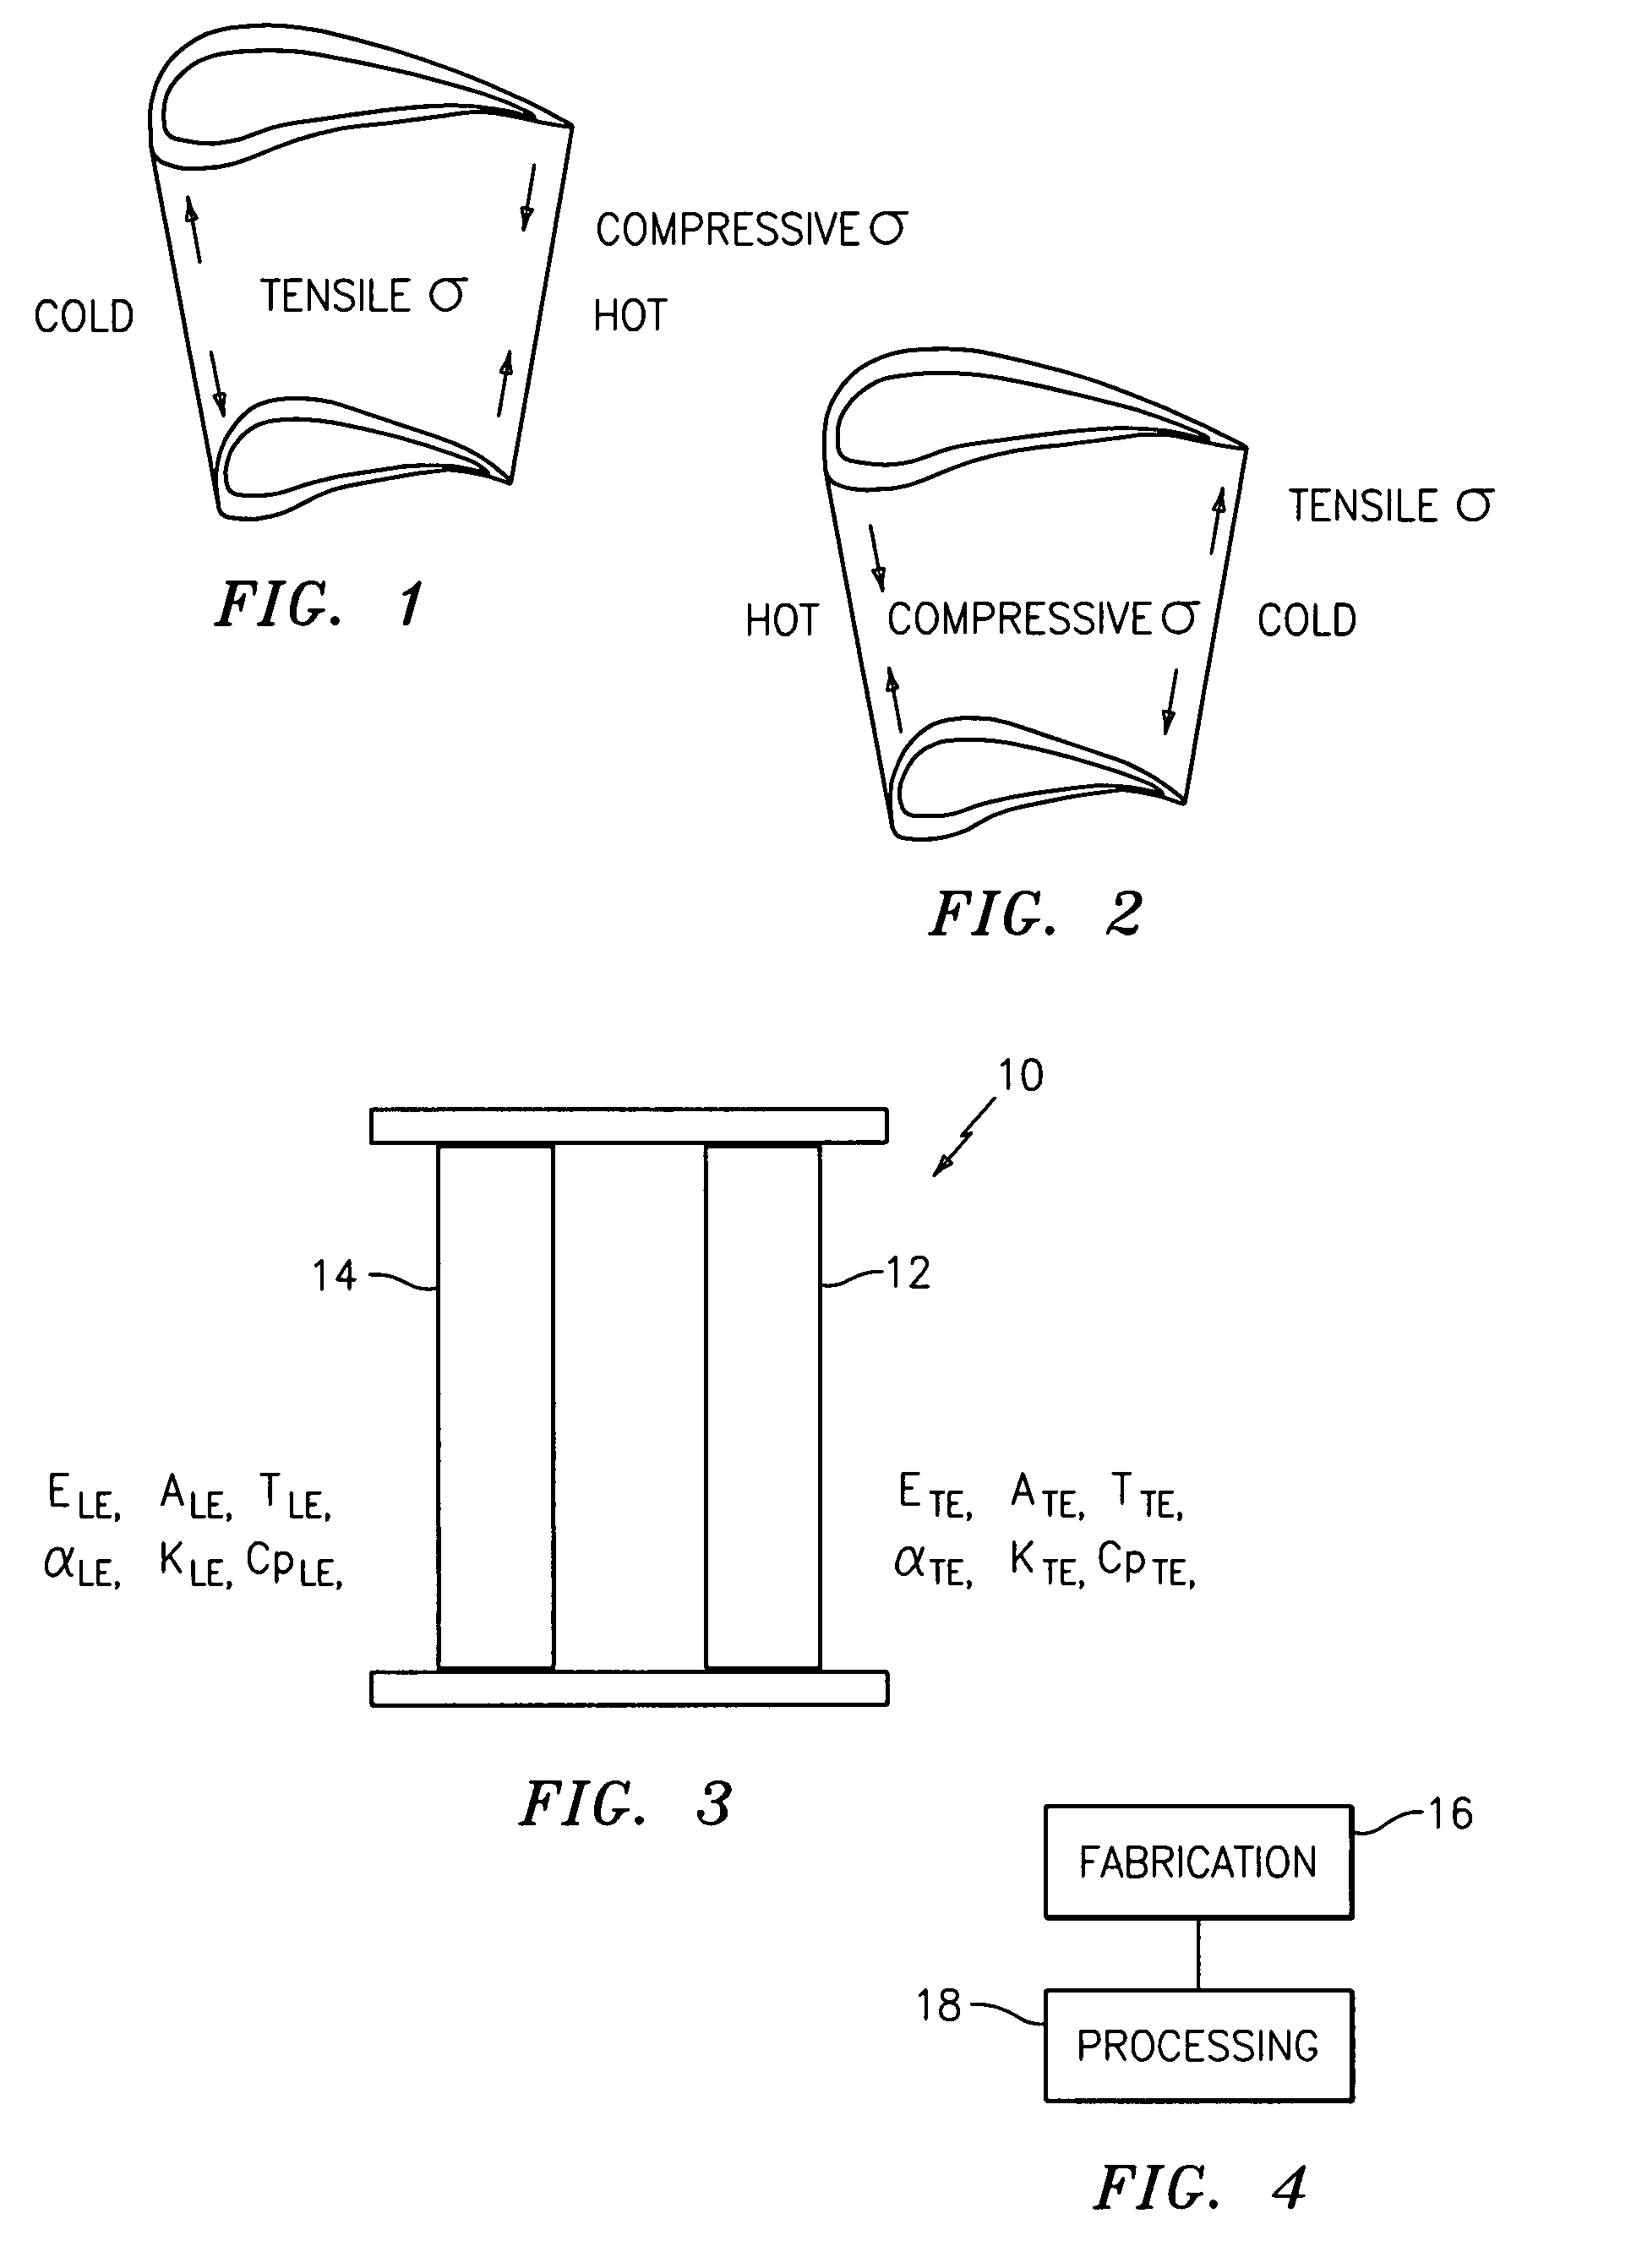 Low transient thermal stress turbine engine components